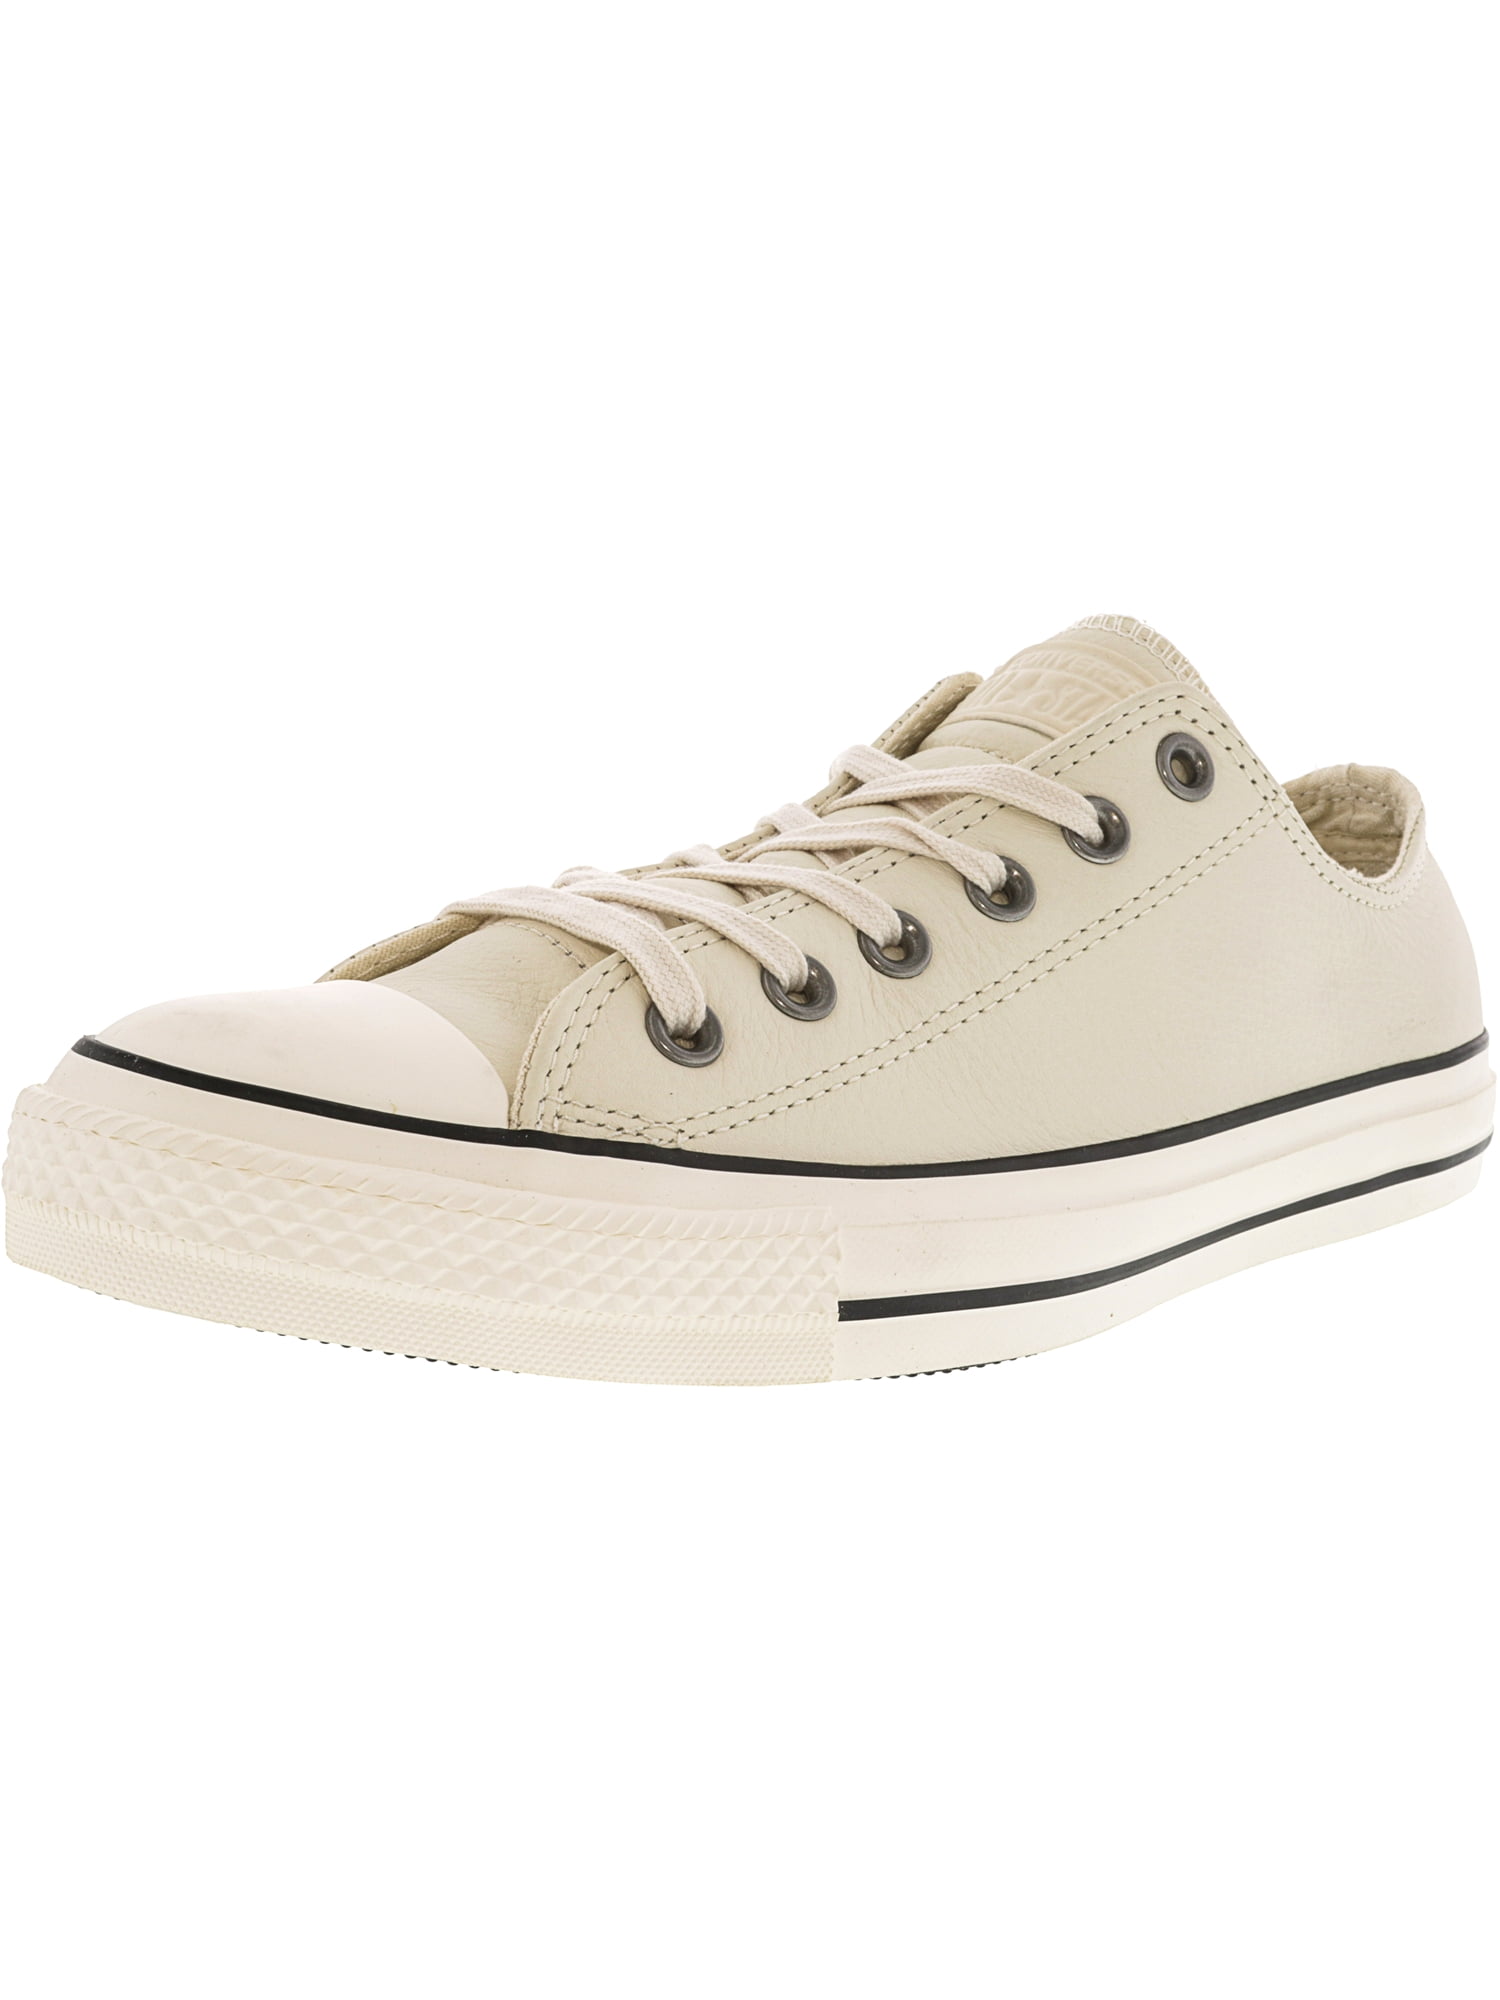 Converse Chuck Taylor All Star Ox Parchment / Black Ankle-High Fashion ...